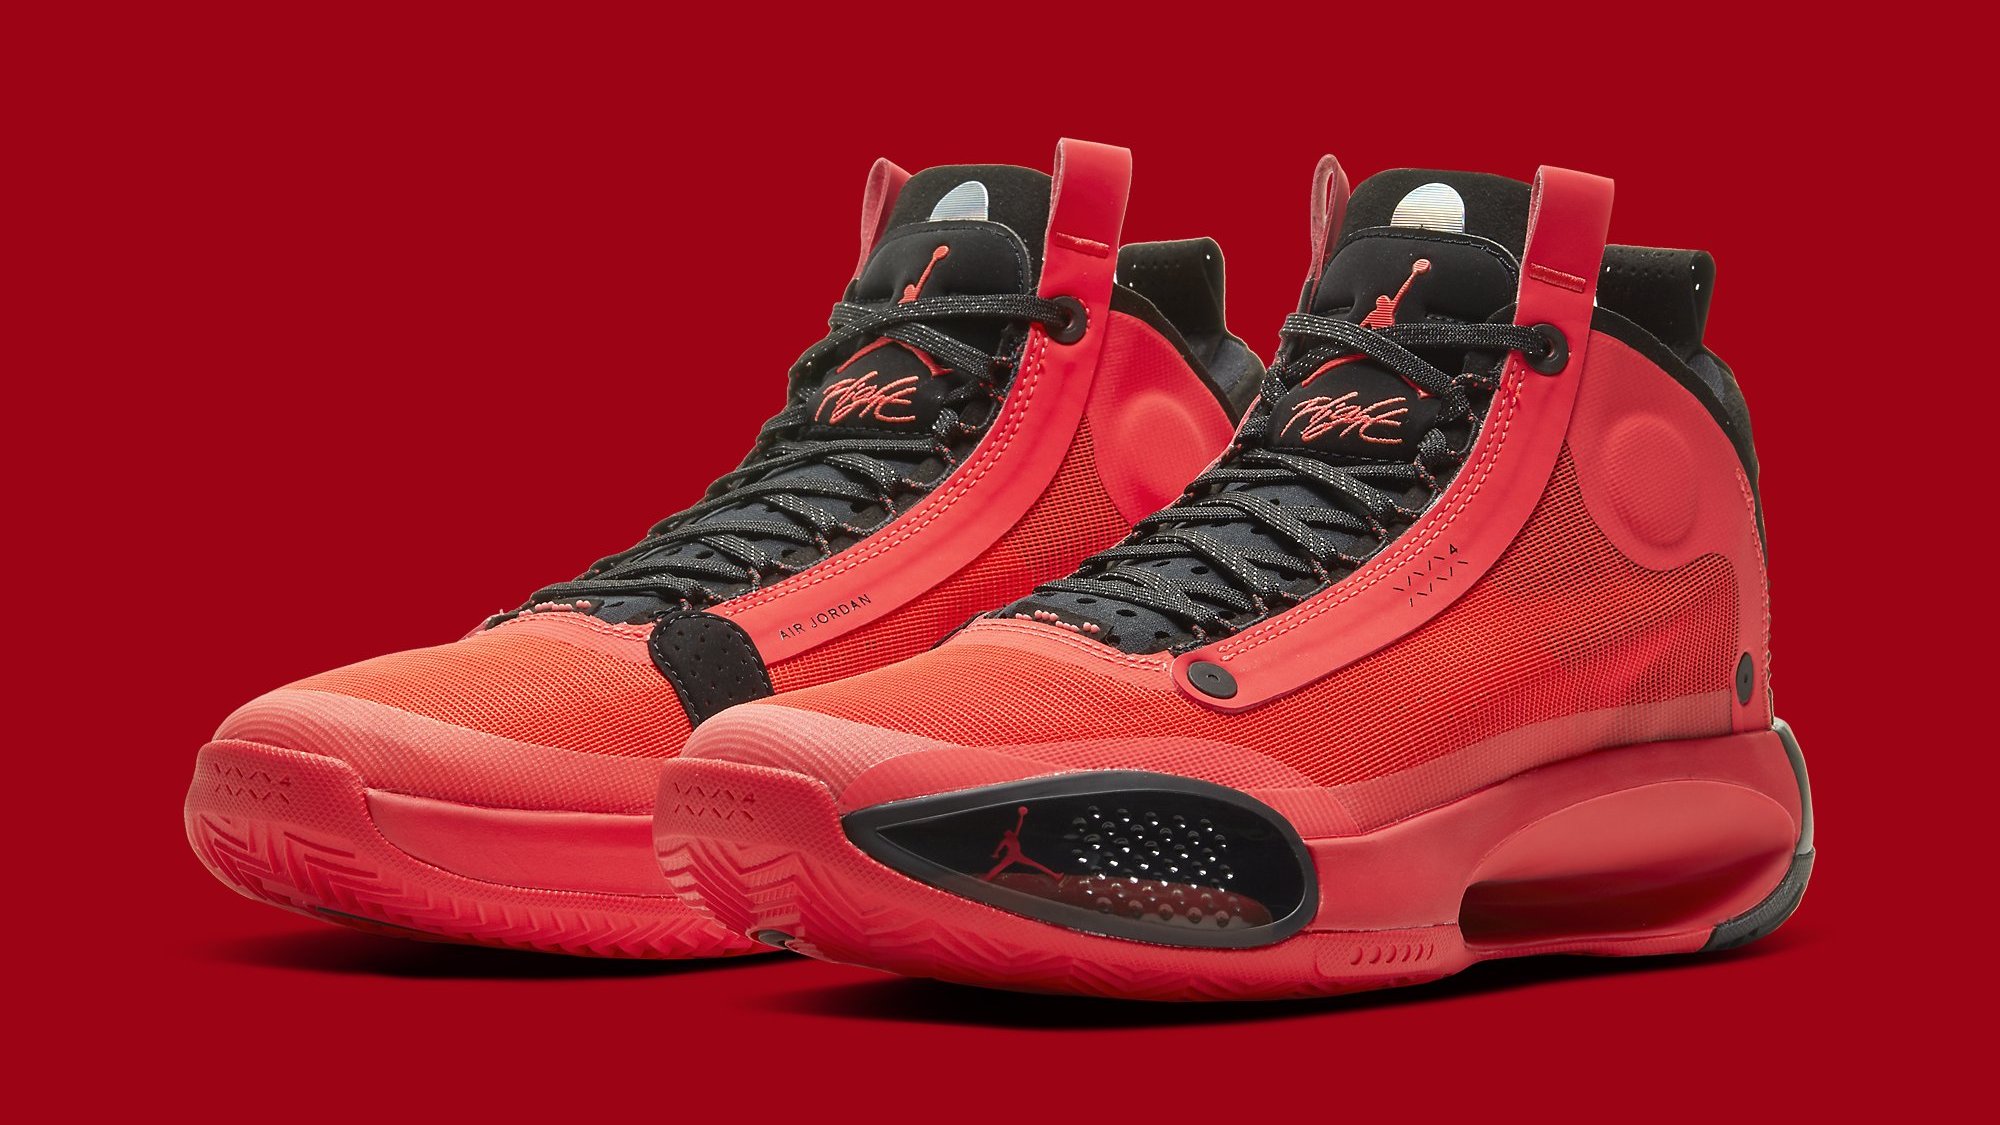 voedsel herberg Roux Air Jordan 34 Infrared Release Date AR3240-600 | Sole Collector